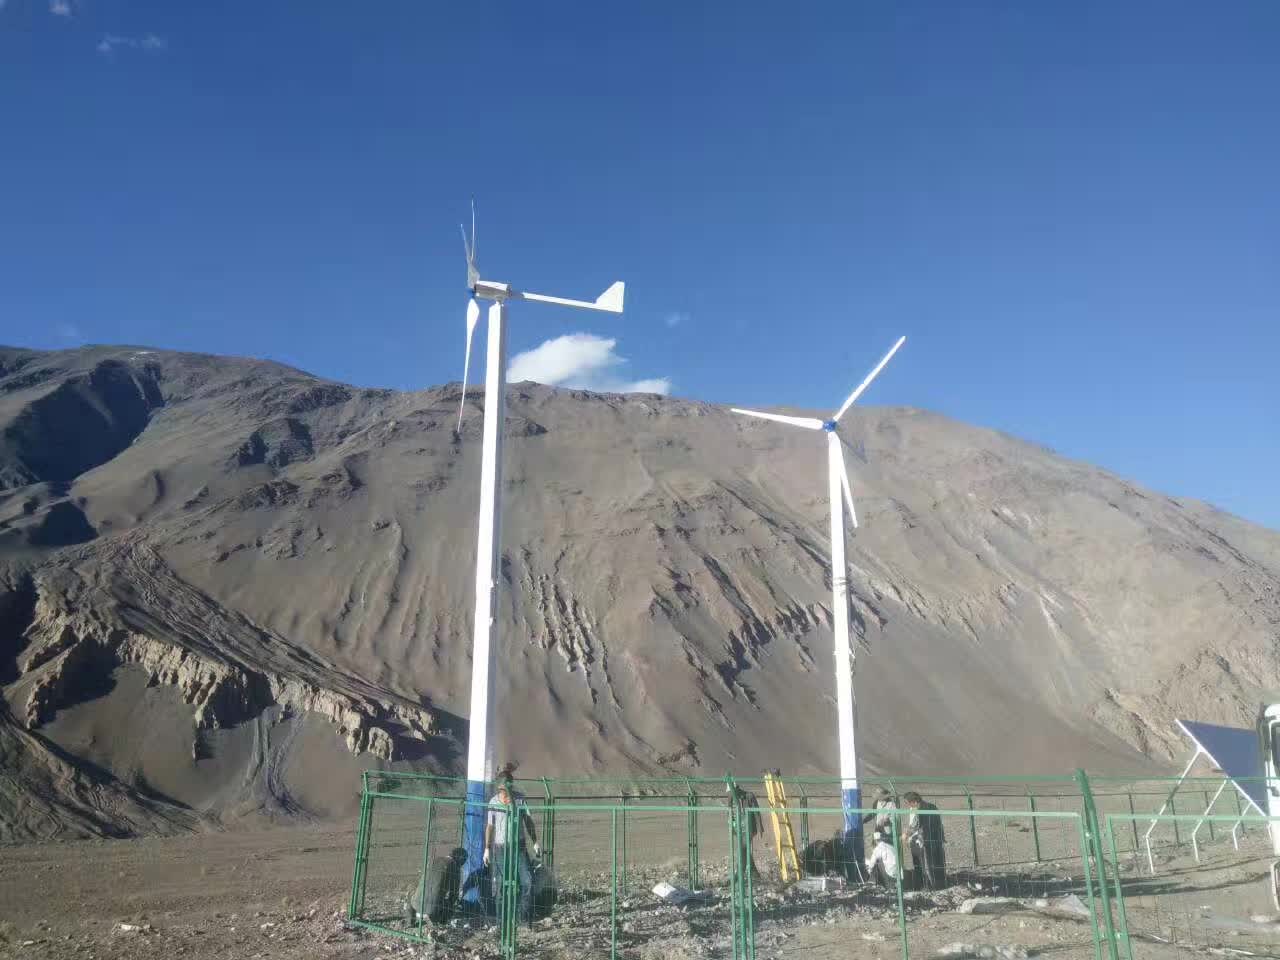 Domestic Wind Turbines - Use Wind Turbines to Power Your Home